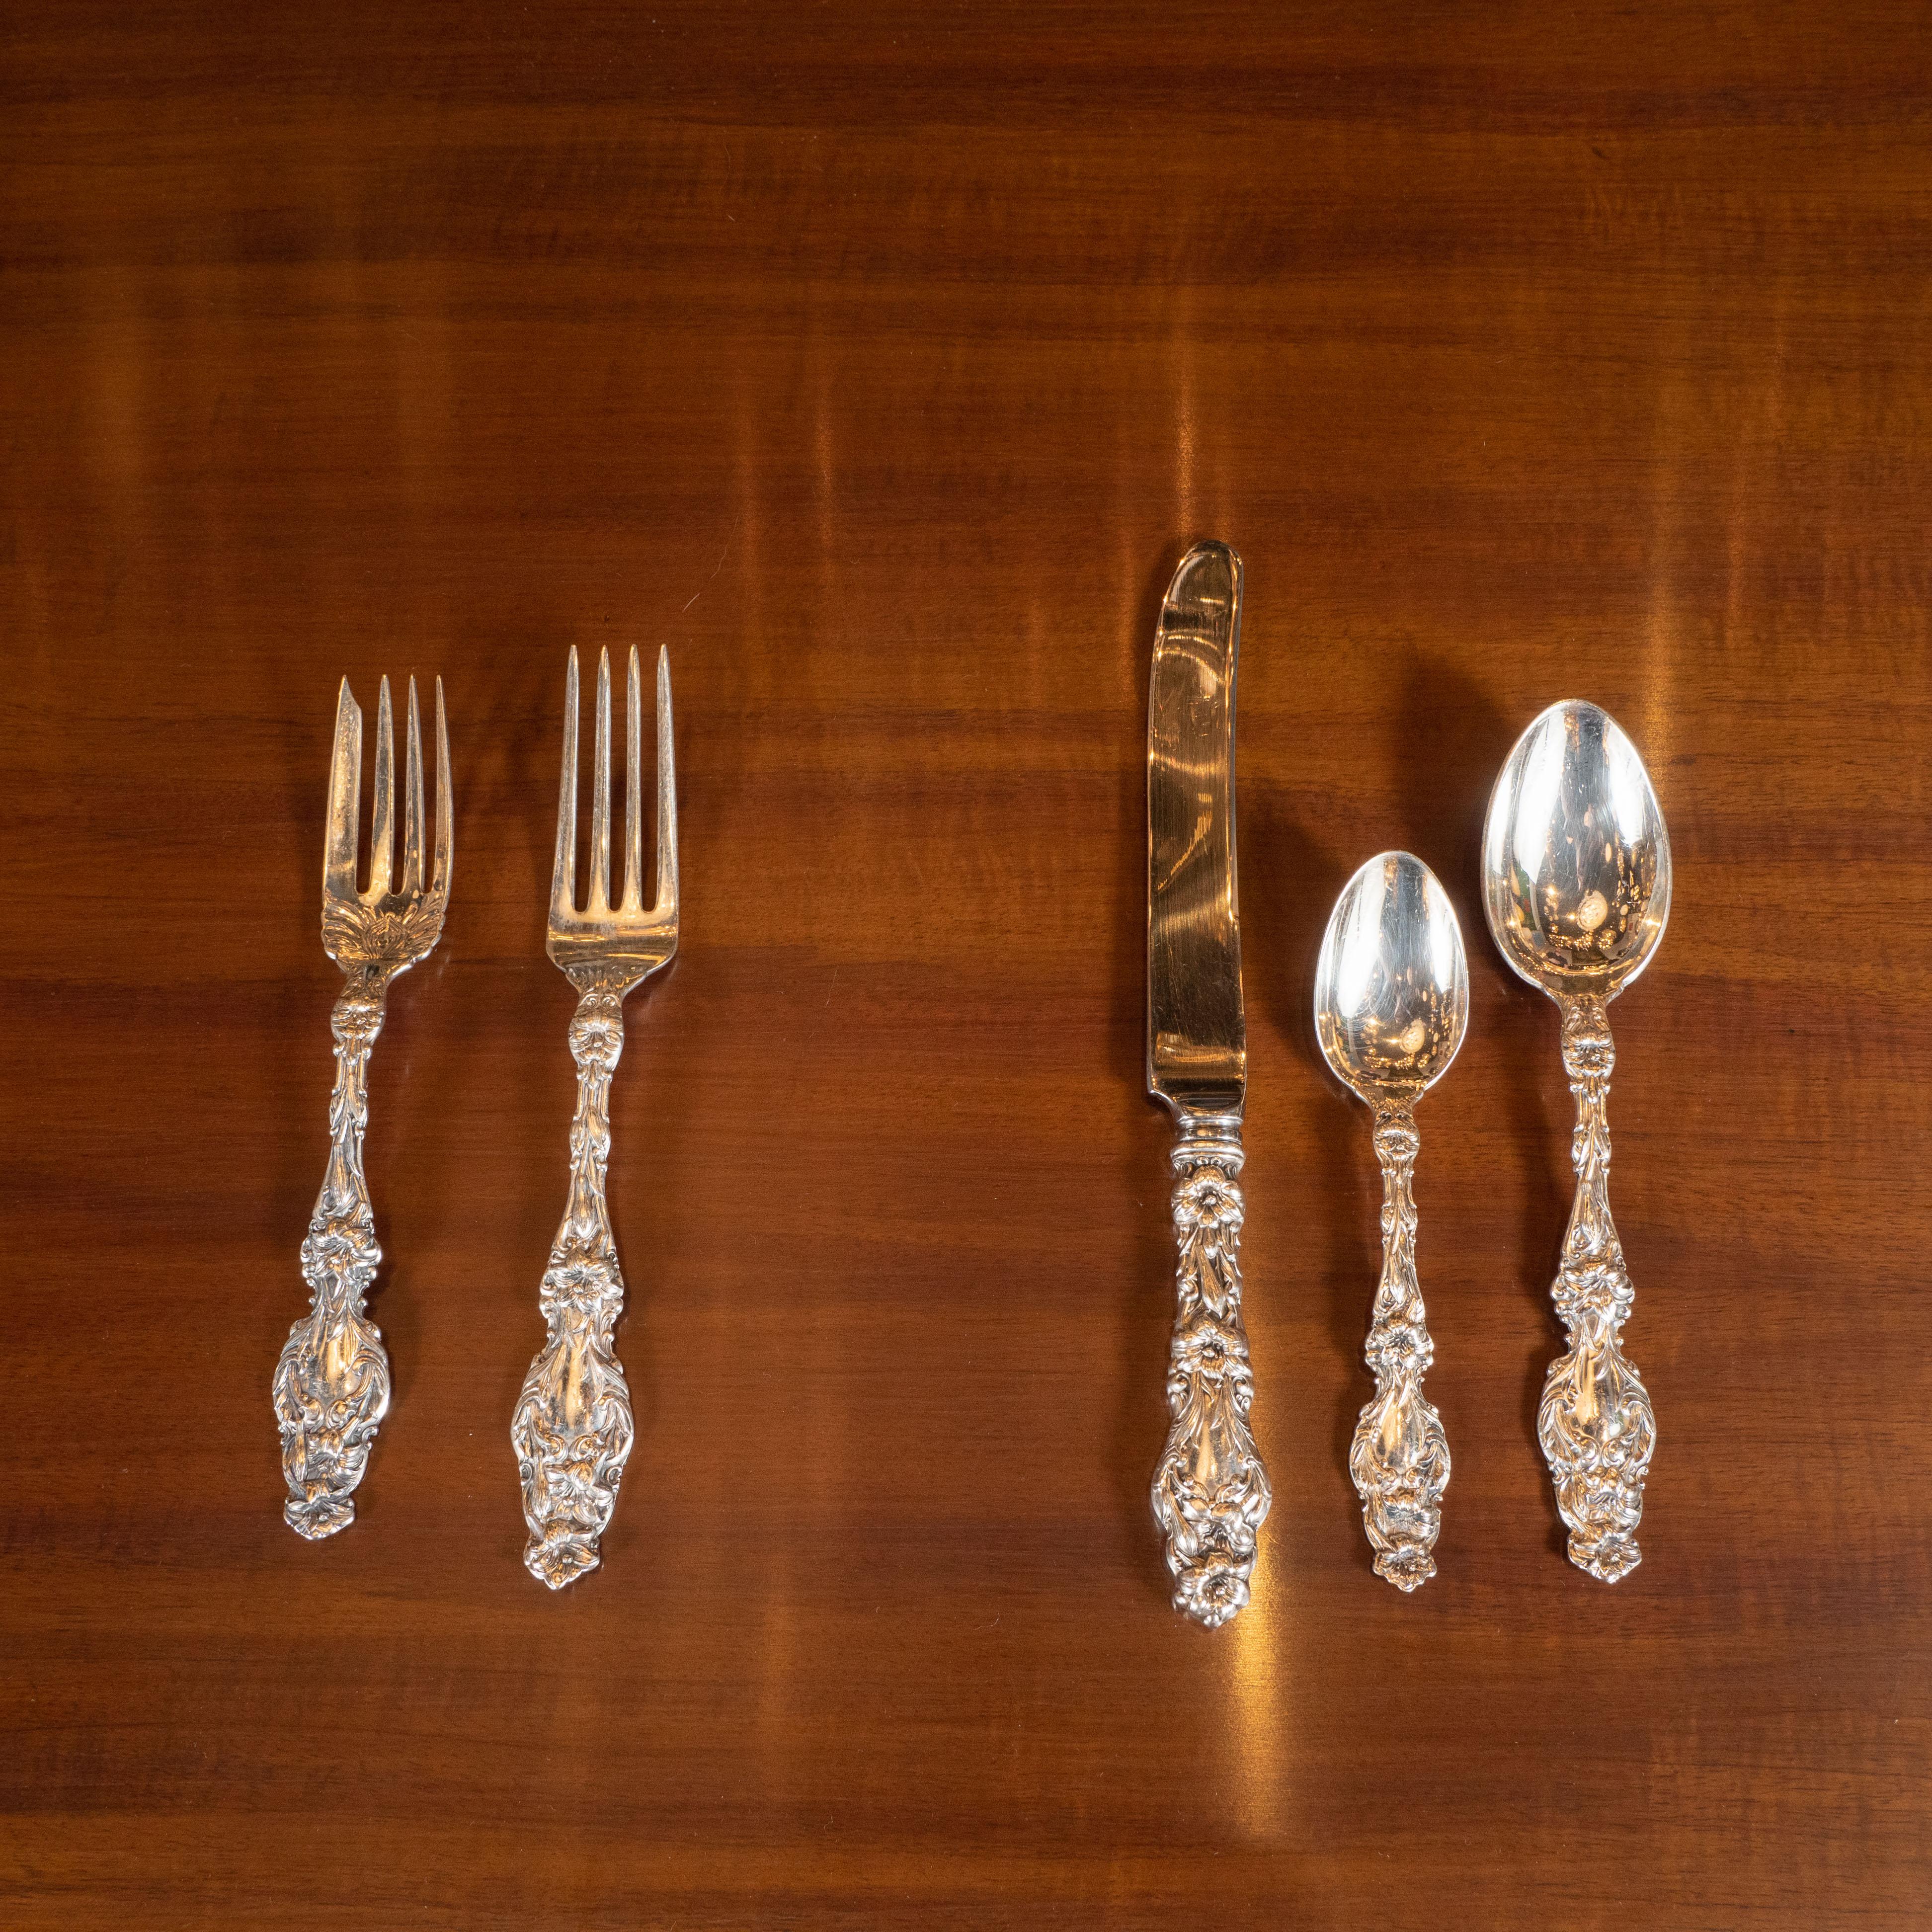 This elegant and ornate Art Nouveau sterling silver flatware service for 12 was forged by the artisans at Gorham in the early 20th century. Gorham, which was founded in 1831 grew to be one of the United States' most prestigious silver manufacturers